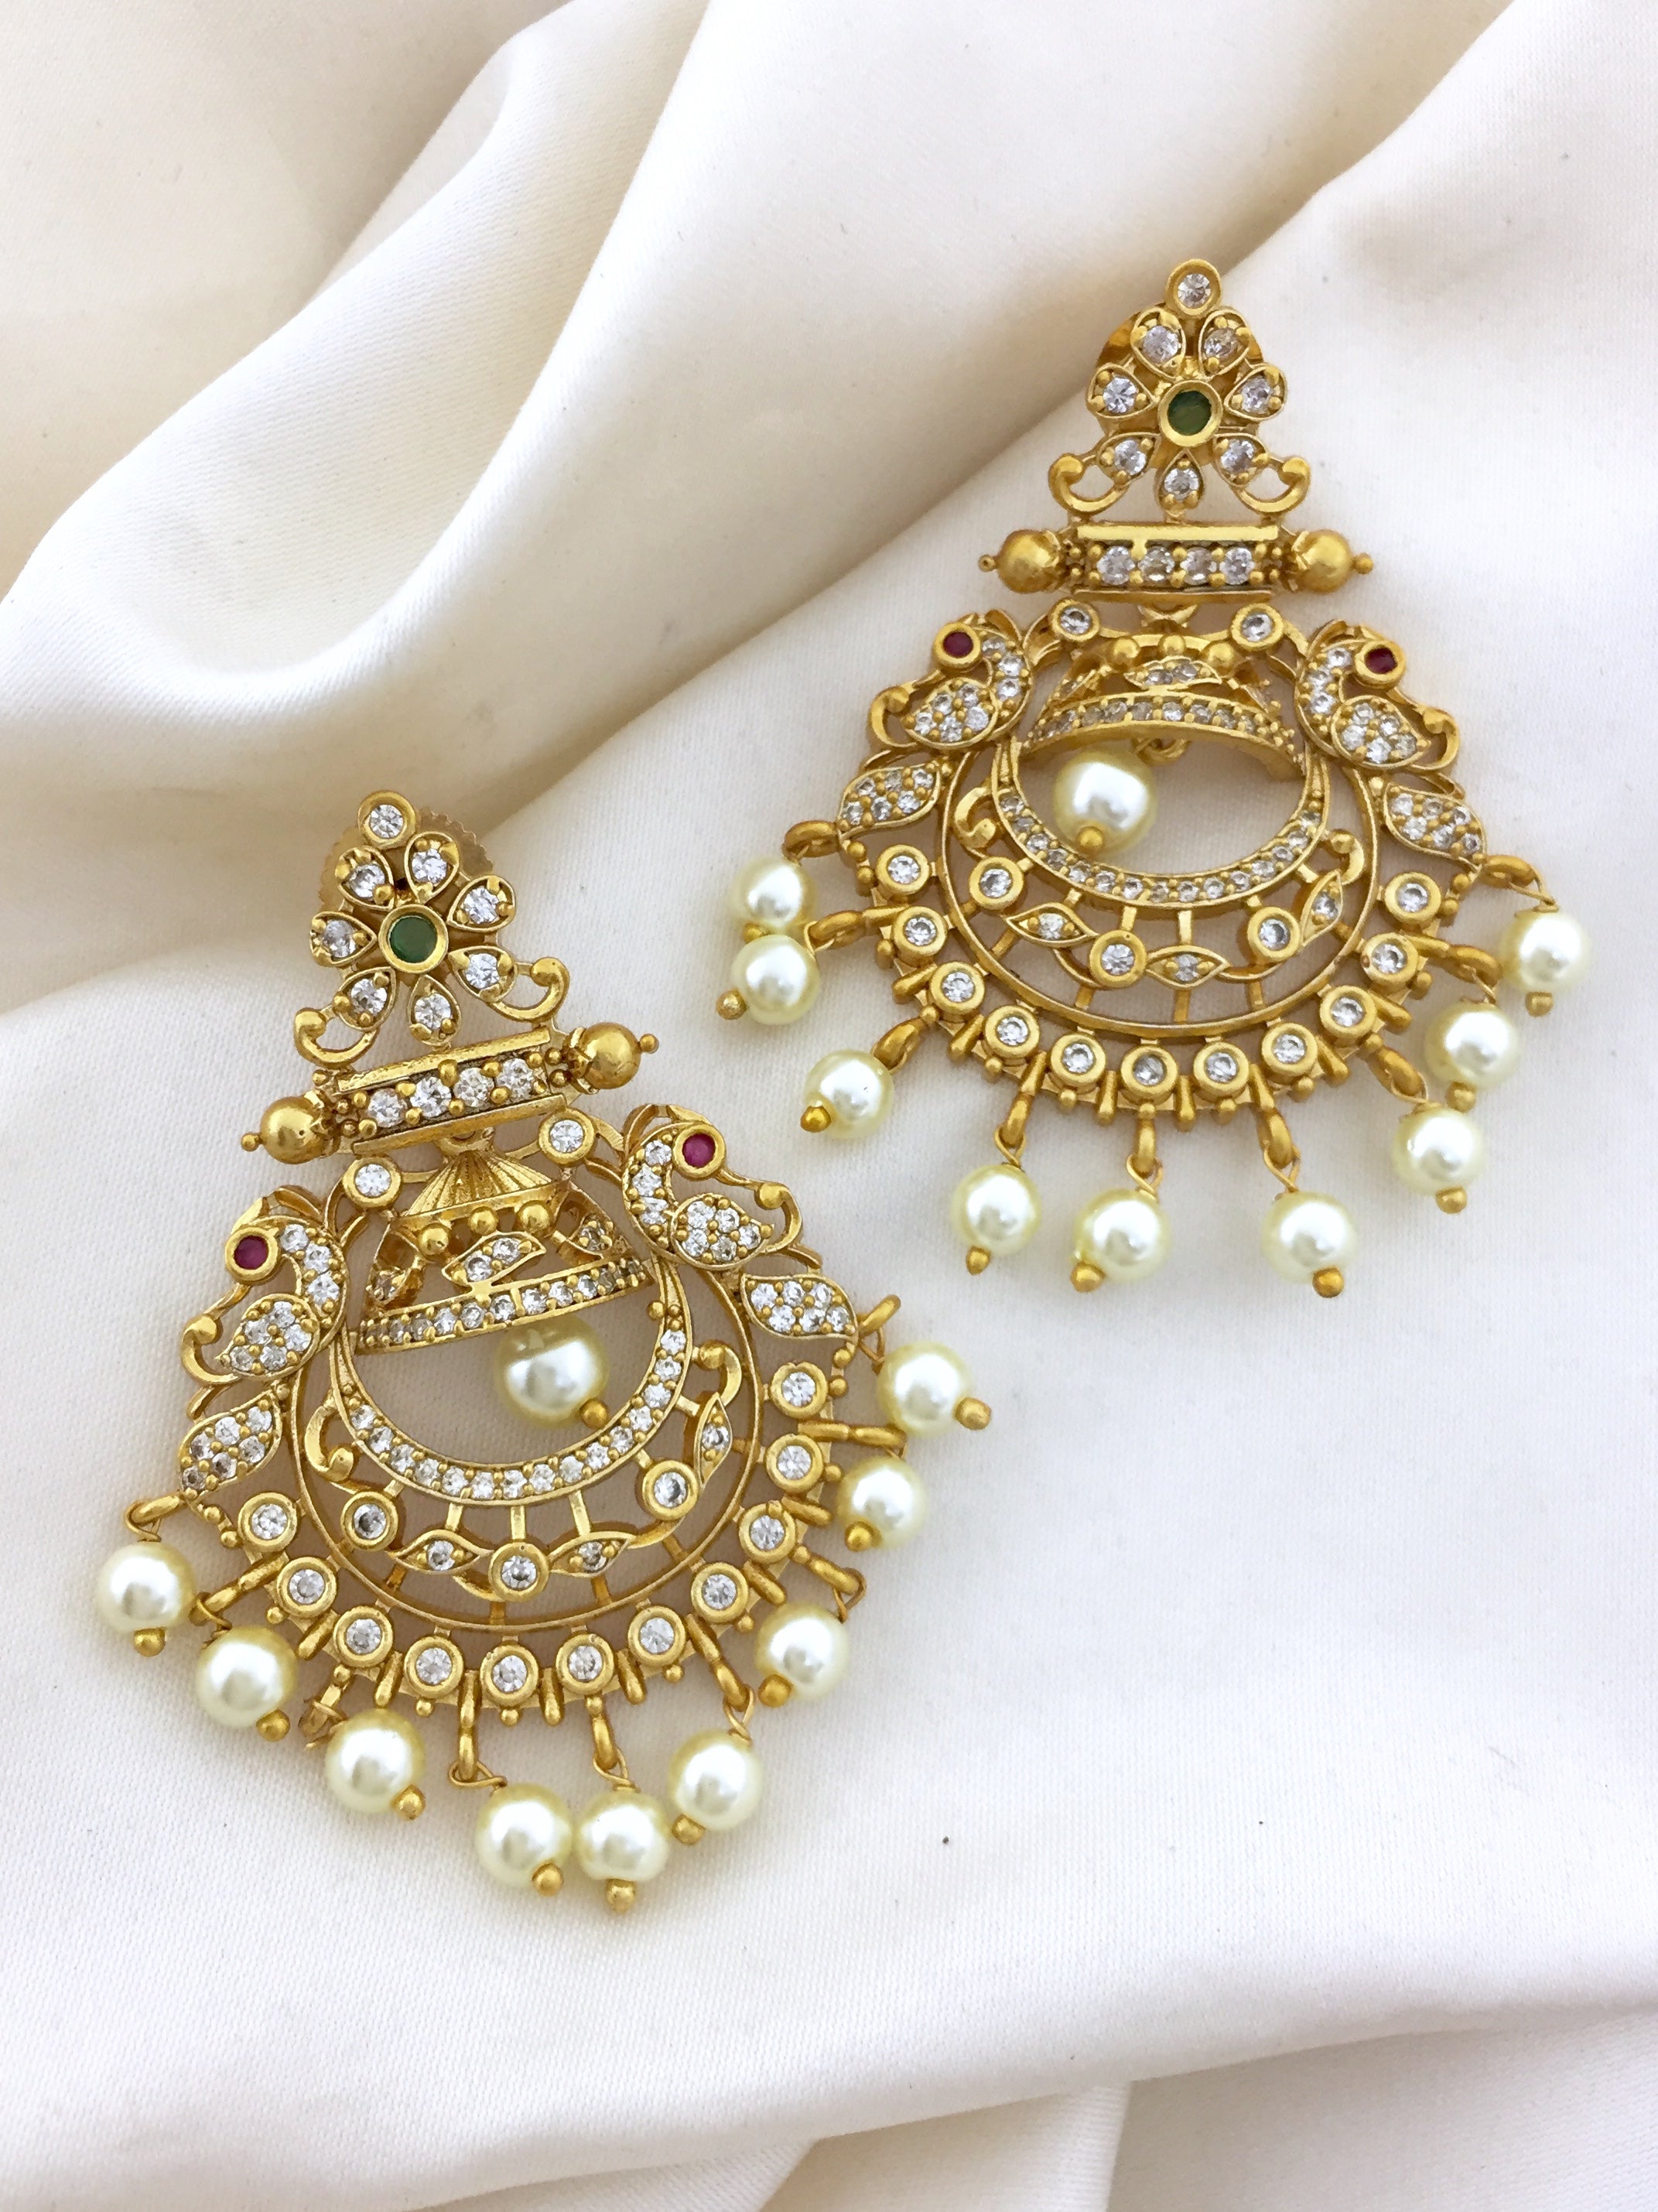 44% OFF on Sthrielite Eye-catchy Cz White Stone Earrings on Snapdeal |  PaisaWapas.com